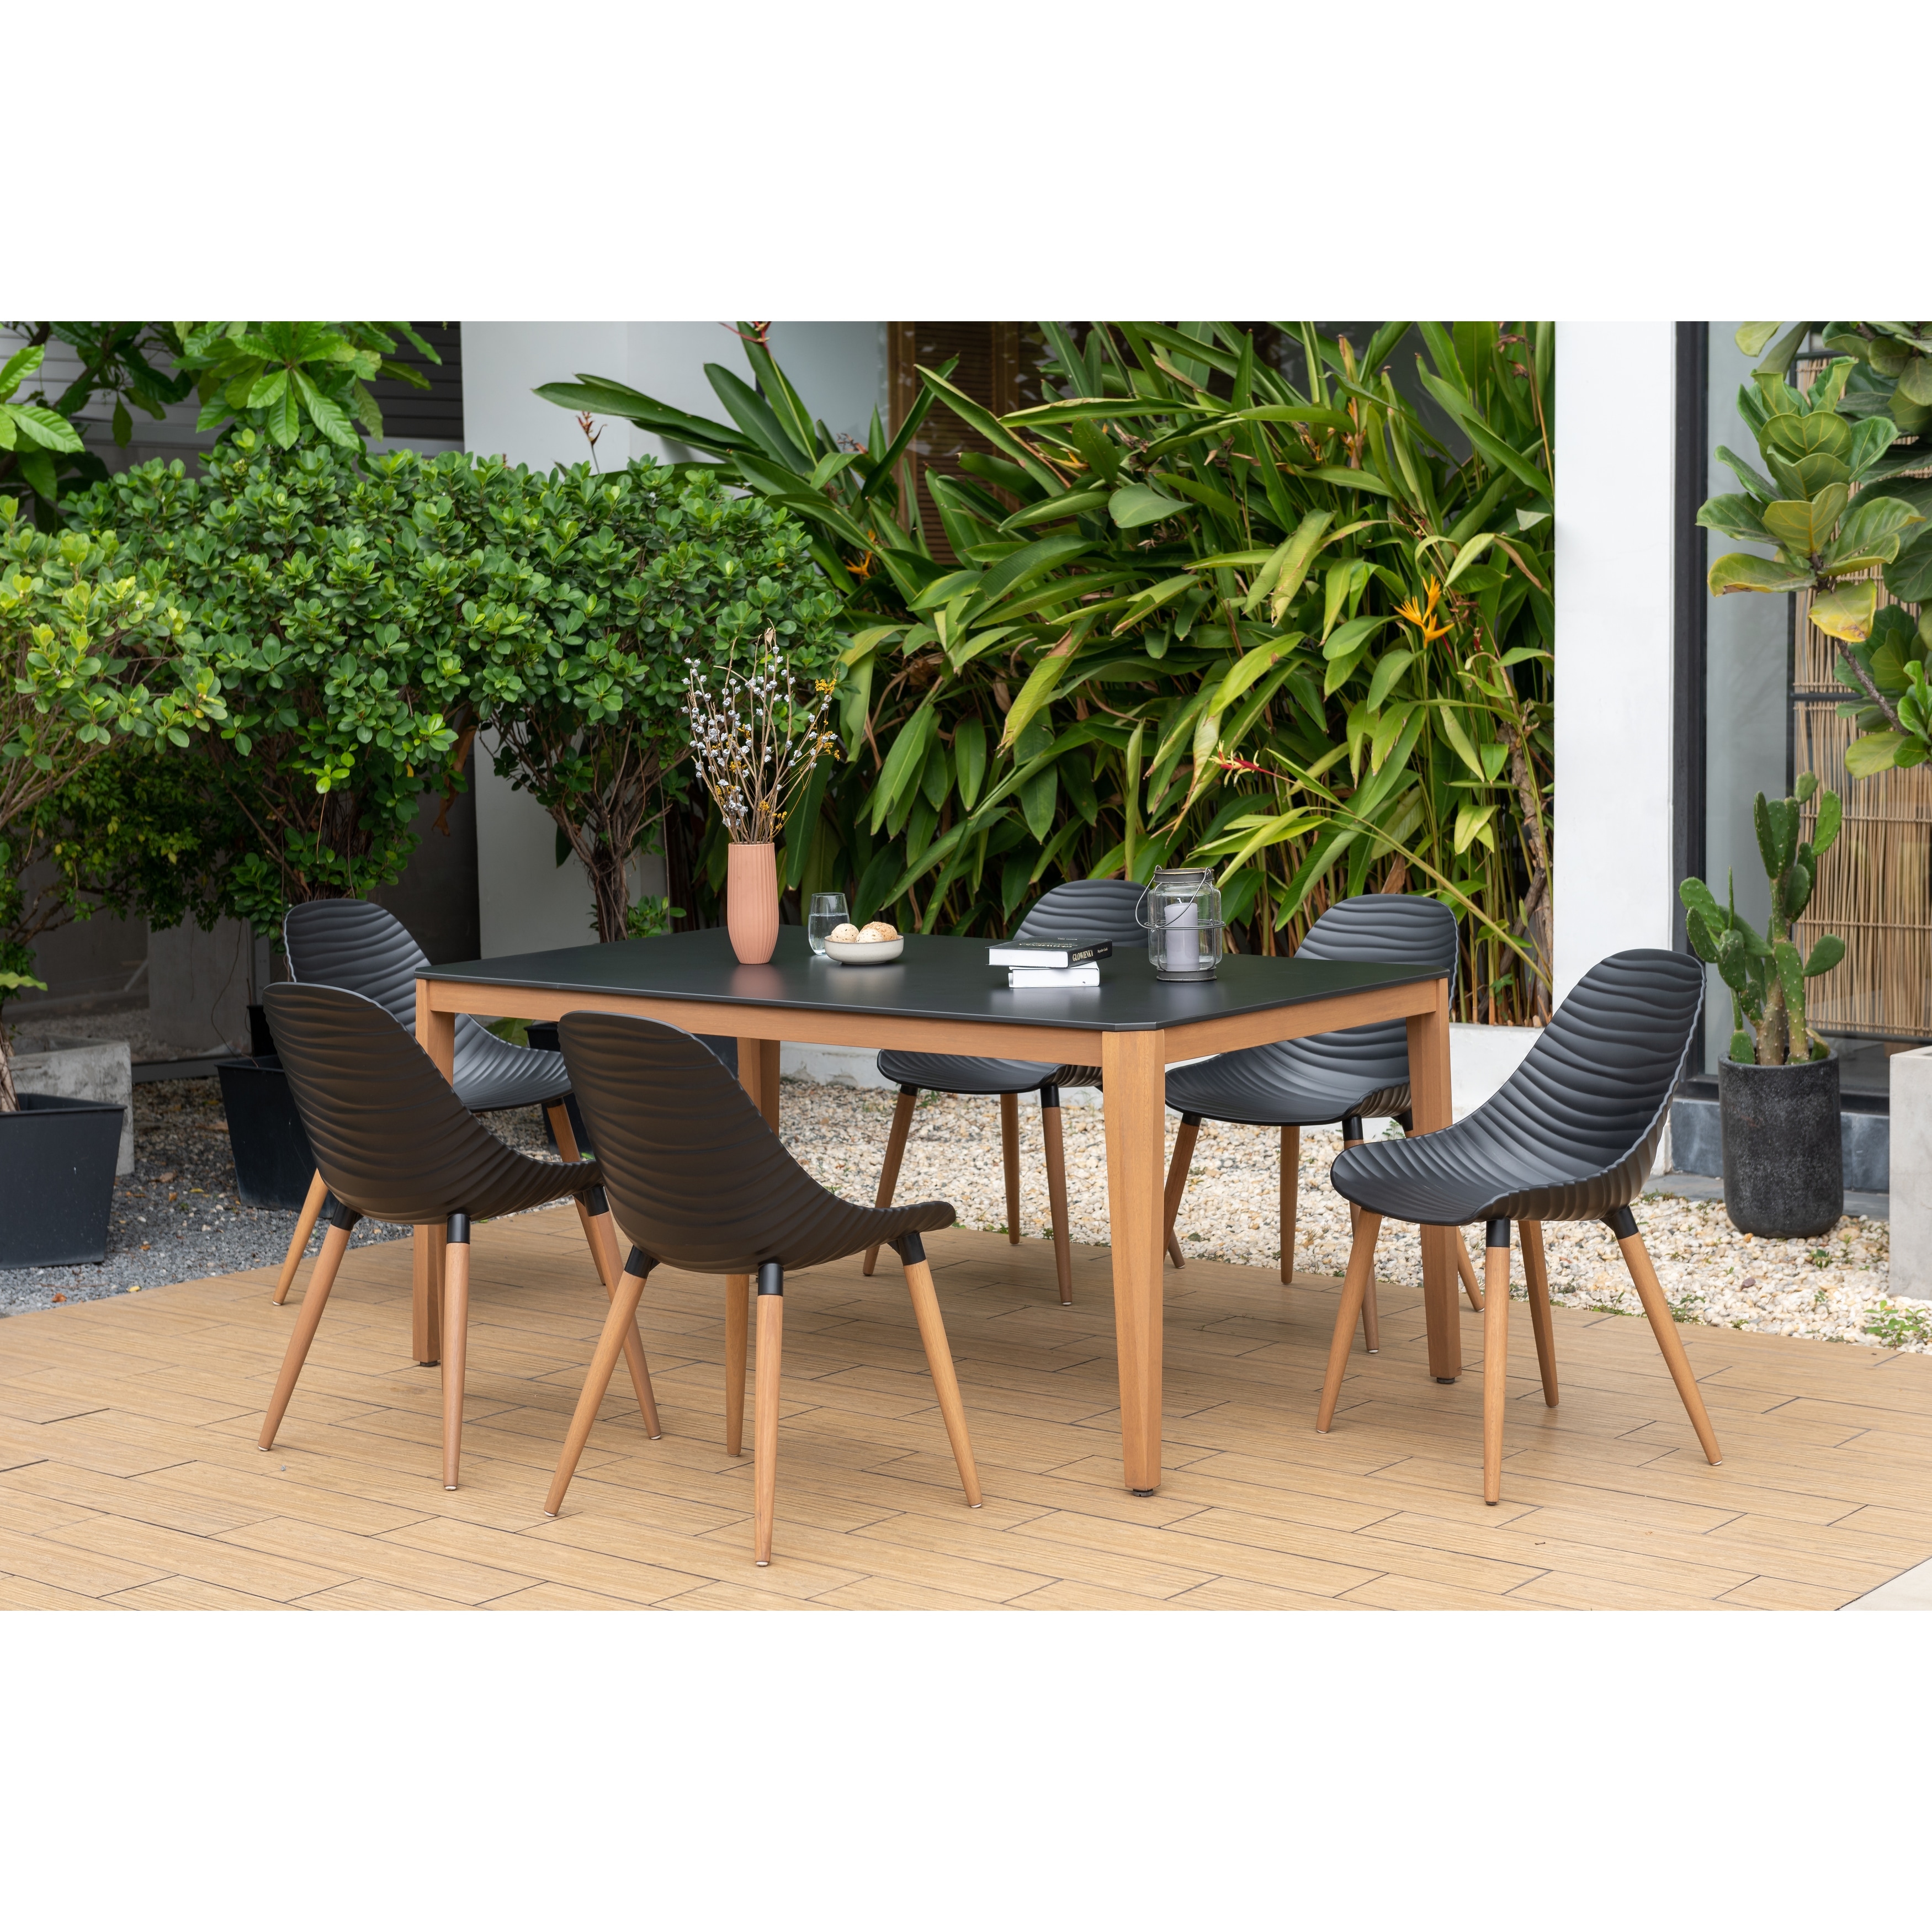 Amazonia Fsc Certified Wood Jenhuer Outdoor Patio Dining Set